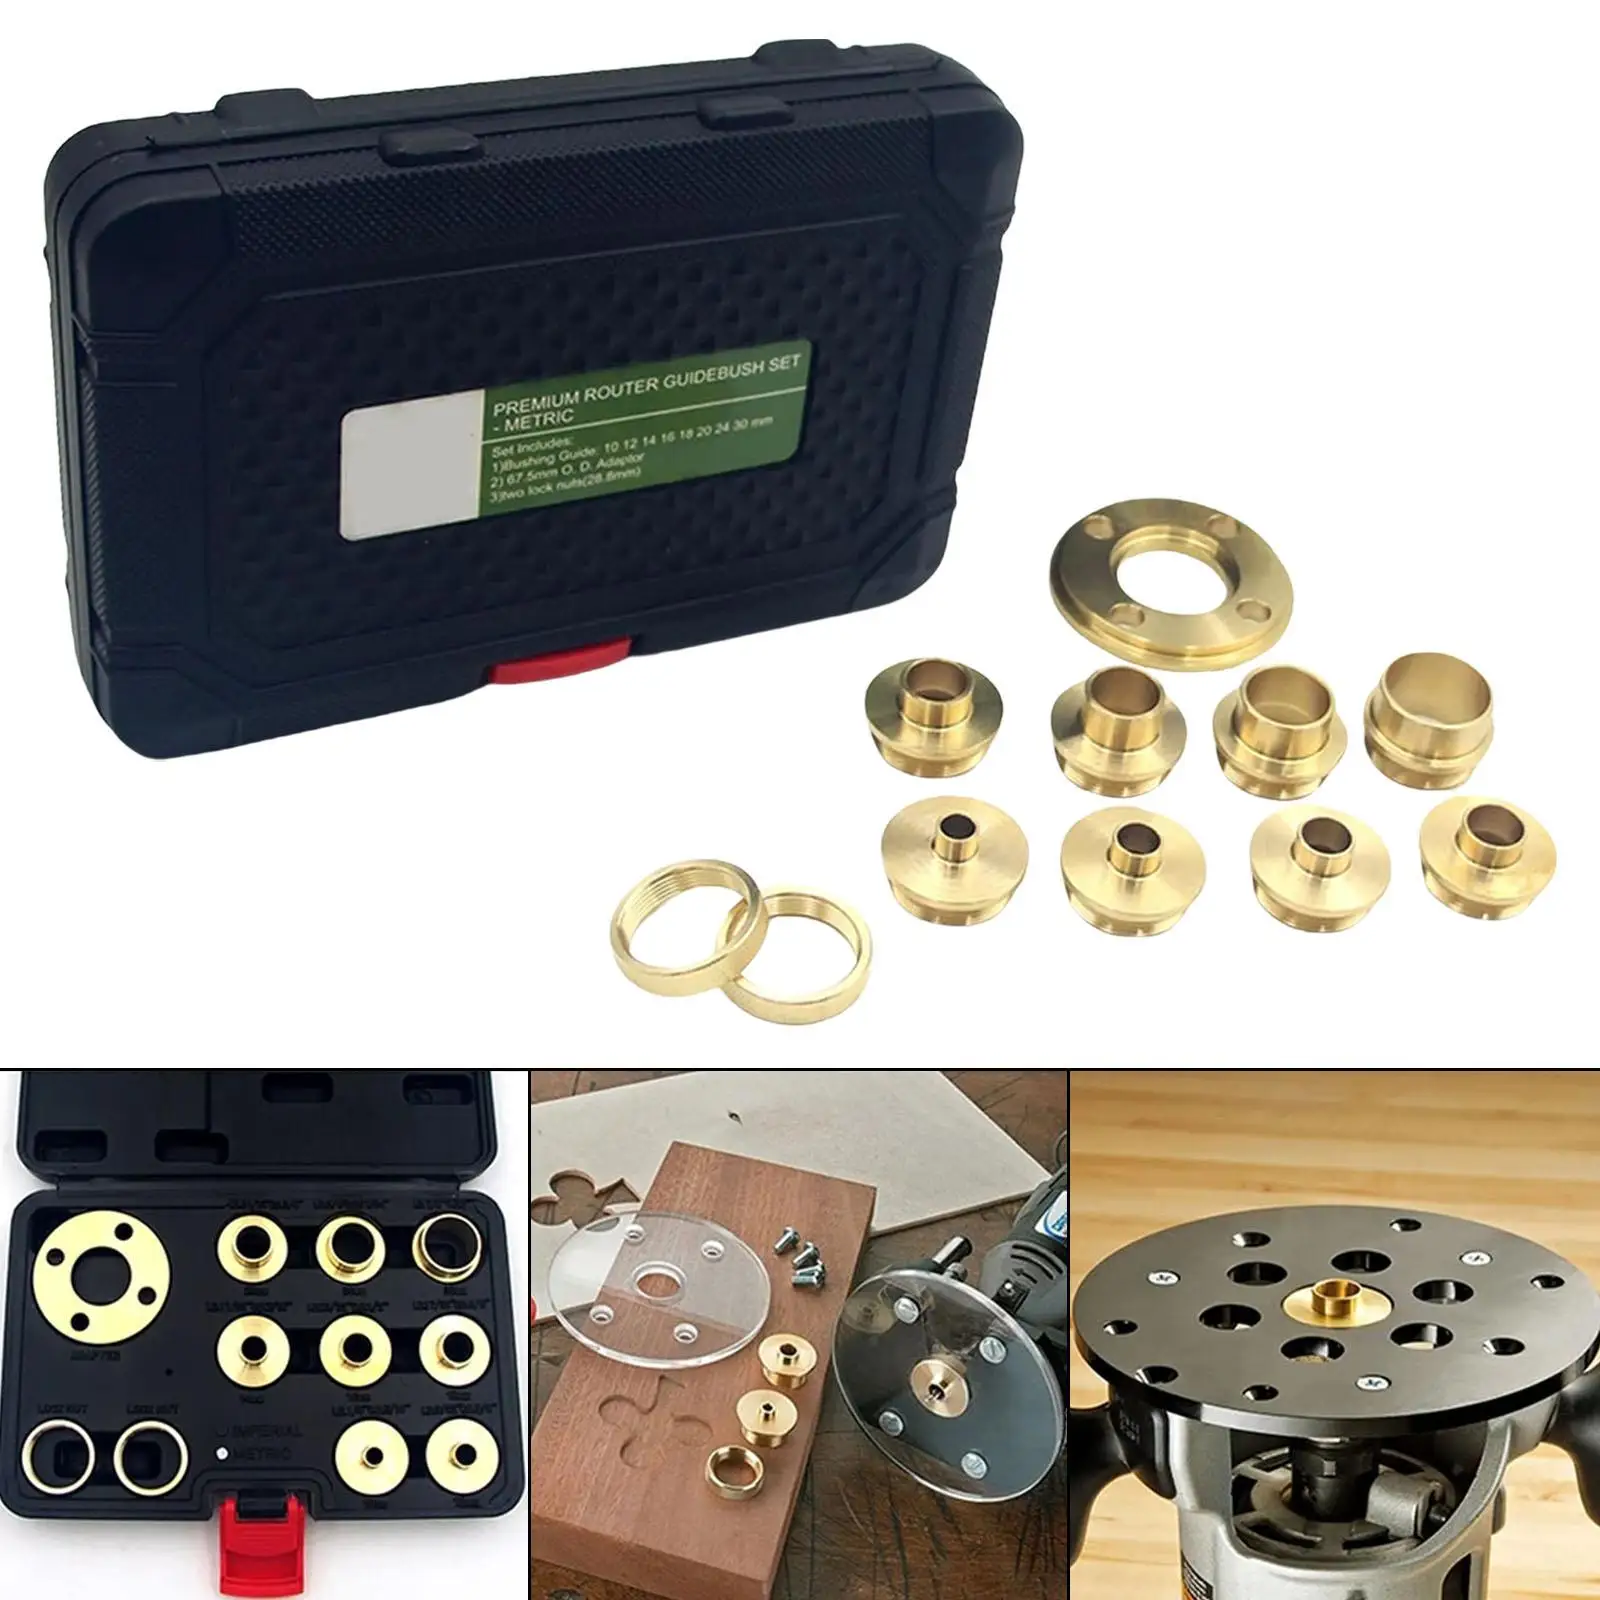 11Pcs/set Brass Router Template Guides 10-30mm Bushings Accessories Equipment for Wood Working